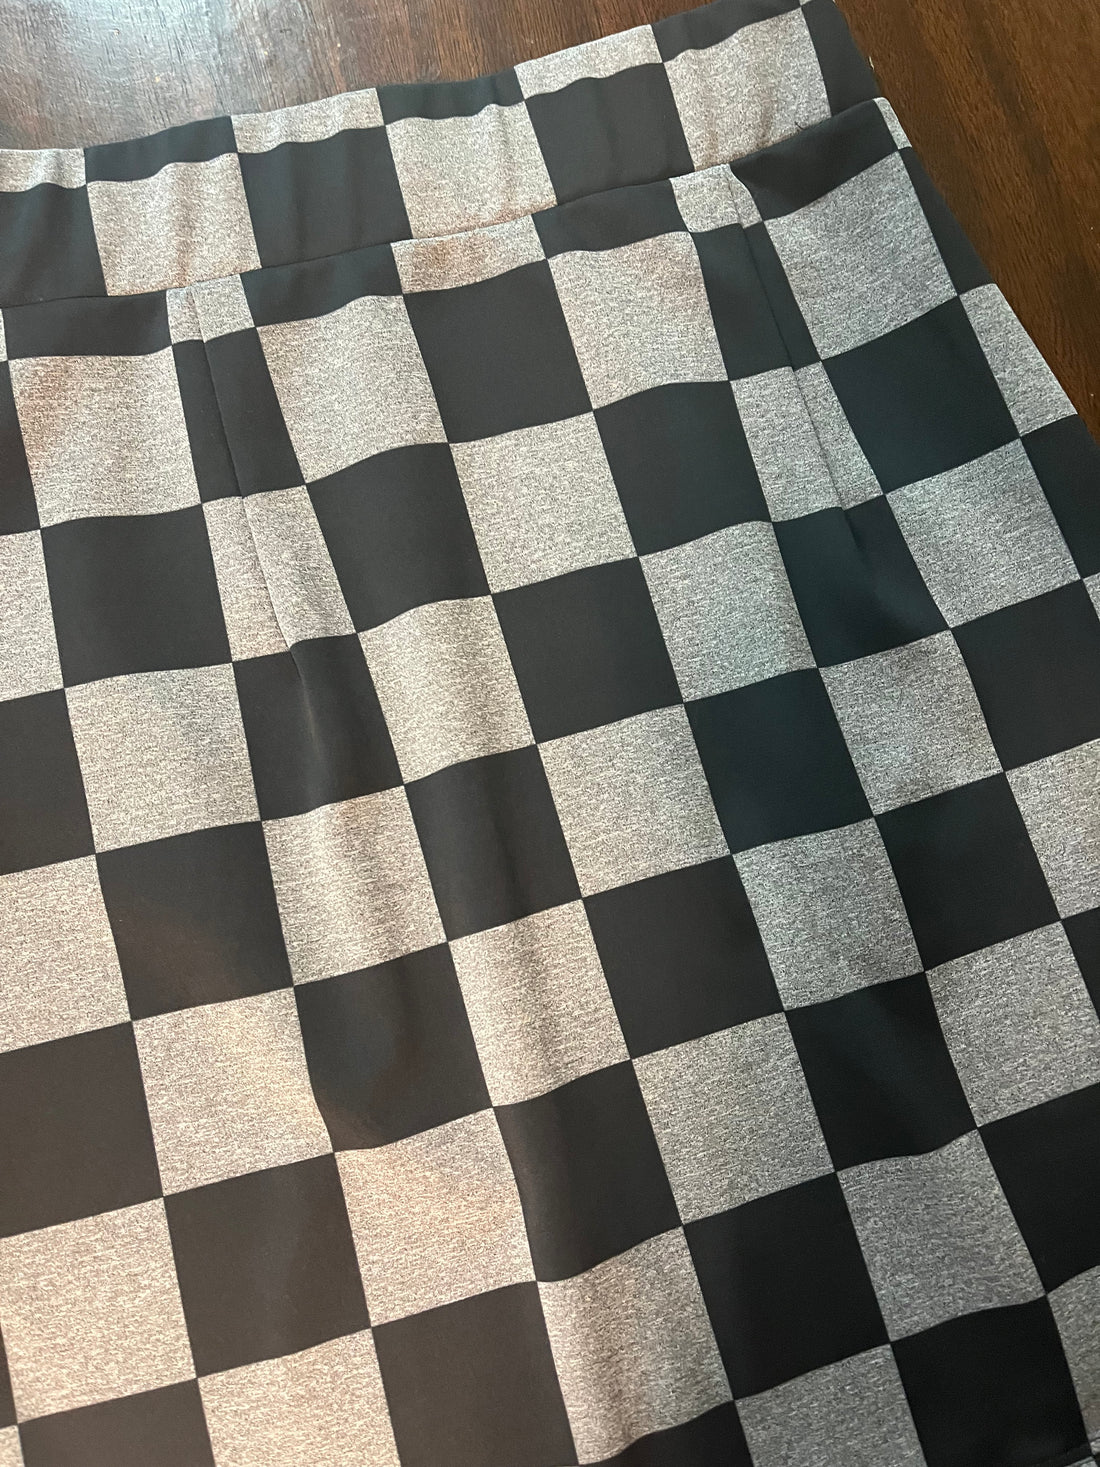 Chess Queen ECO Mini-Skirt (Free Shipping!)